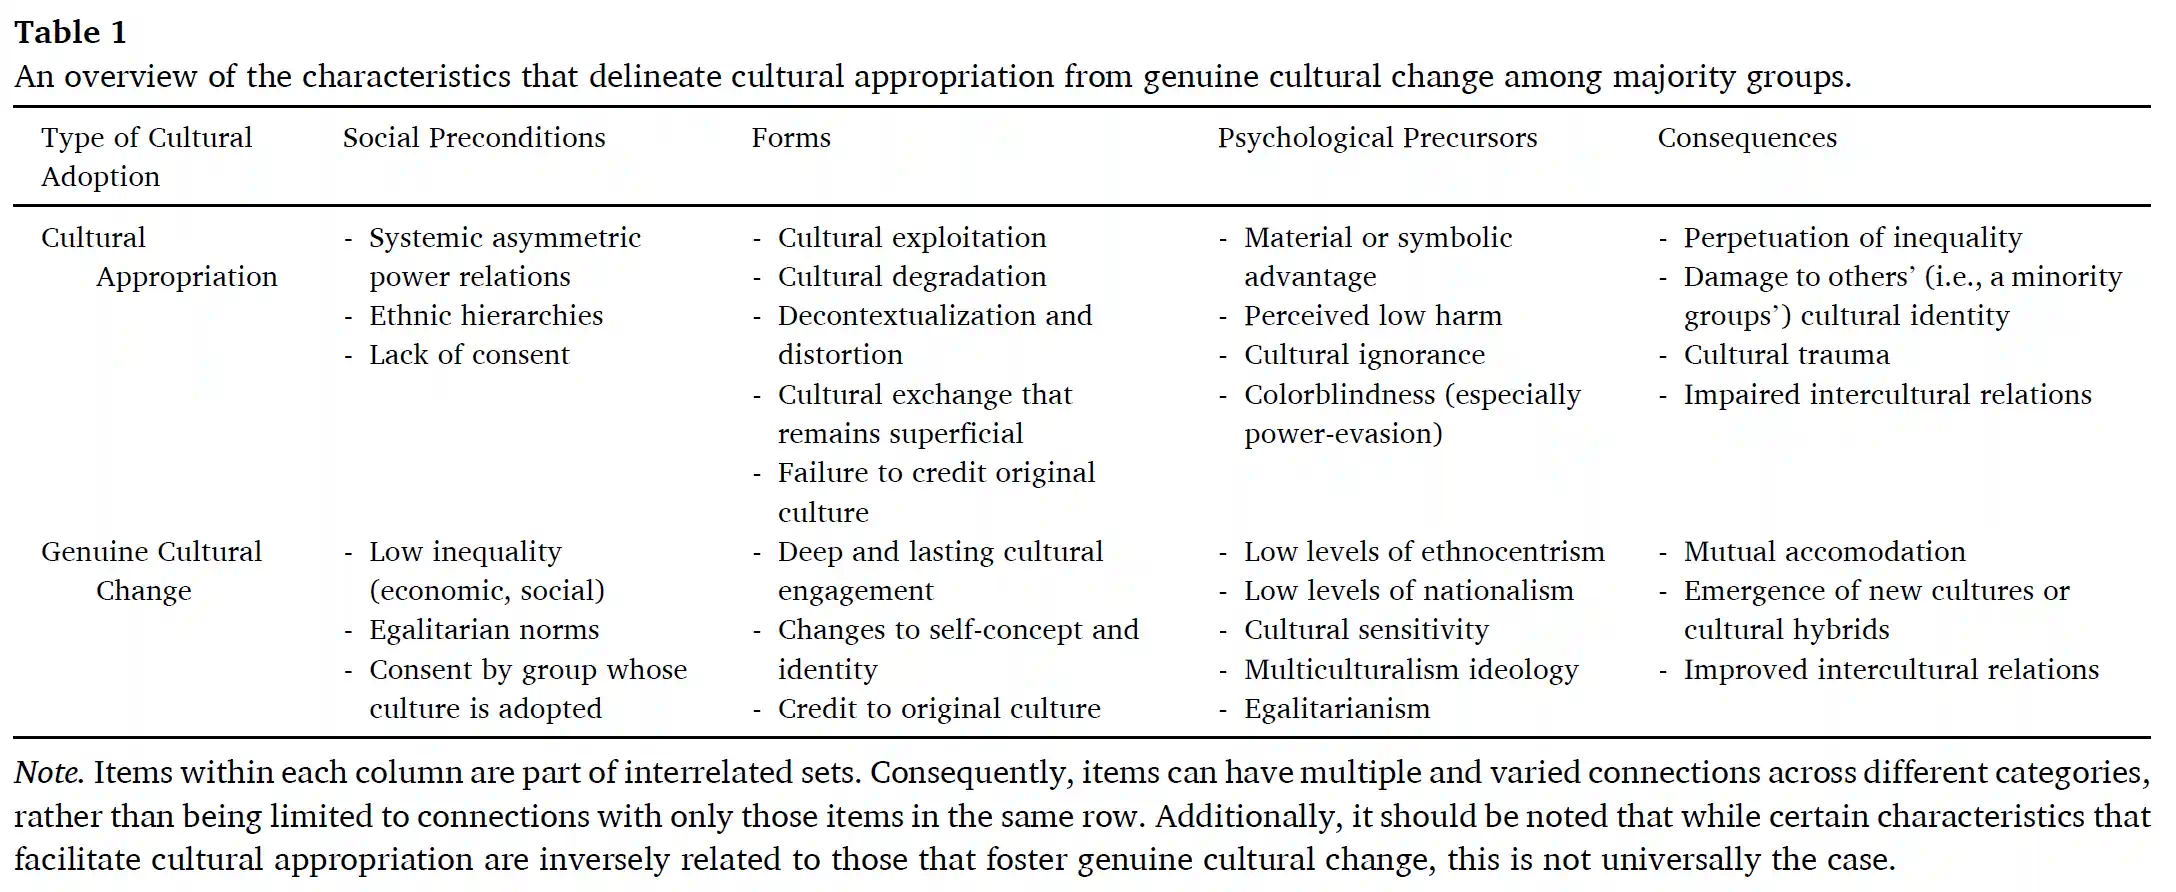 majority-group acculturation and cultural appropriation